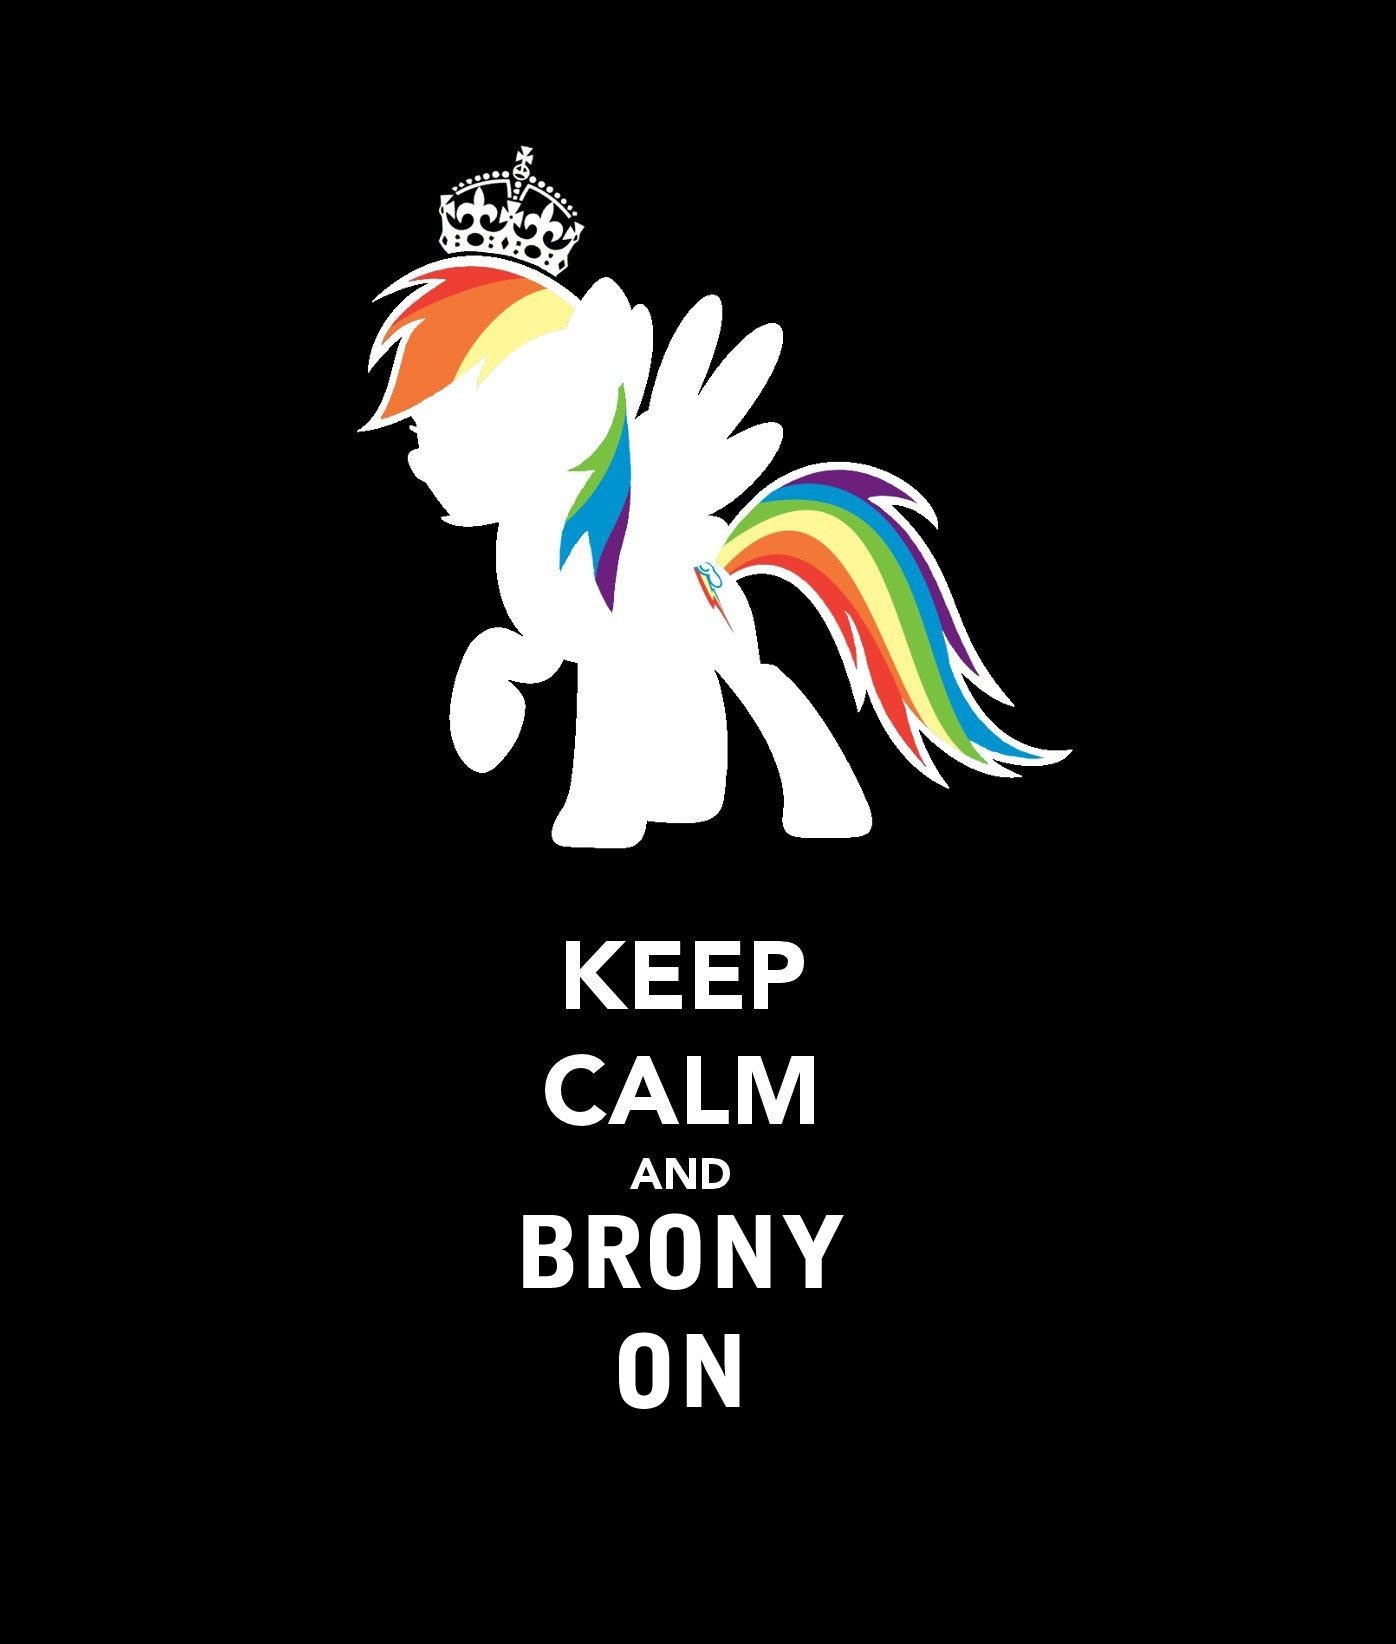 Photo by LilMissMorpho with the username @LilMissMorpho,  December 20, 2012 at 11:23 AM and the text says 'MLP: FiM - Keep Calm Poster  #Keep  #Calm  #Mlp  #FiM  #Fandom  #MLP  #mlp  #MLP:  #FiM  #Bronies  #Brony  #Posts  #Brony  #Pics'